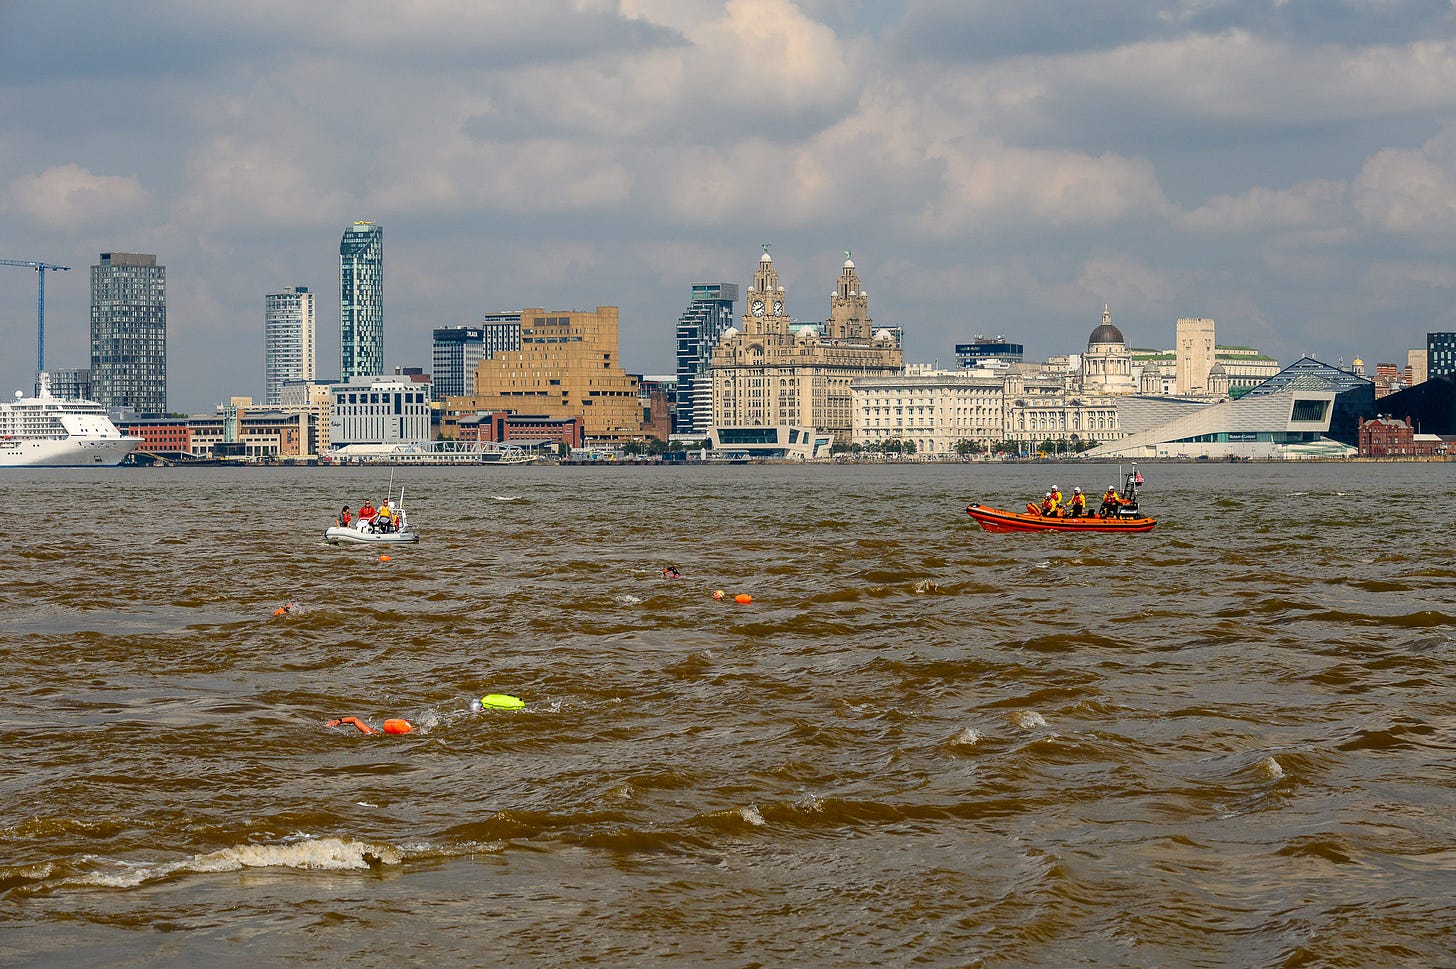 People with toe floats swimming across the River Mersey. There are safety boats in the area and the skyline in the distance.